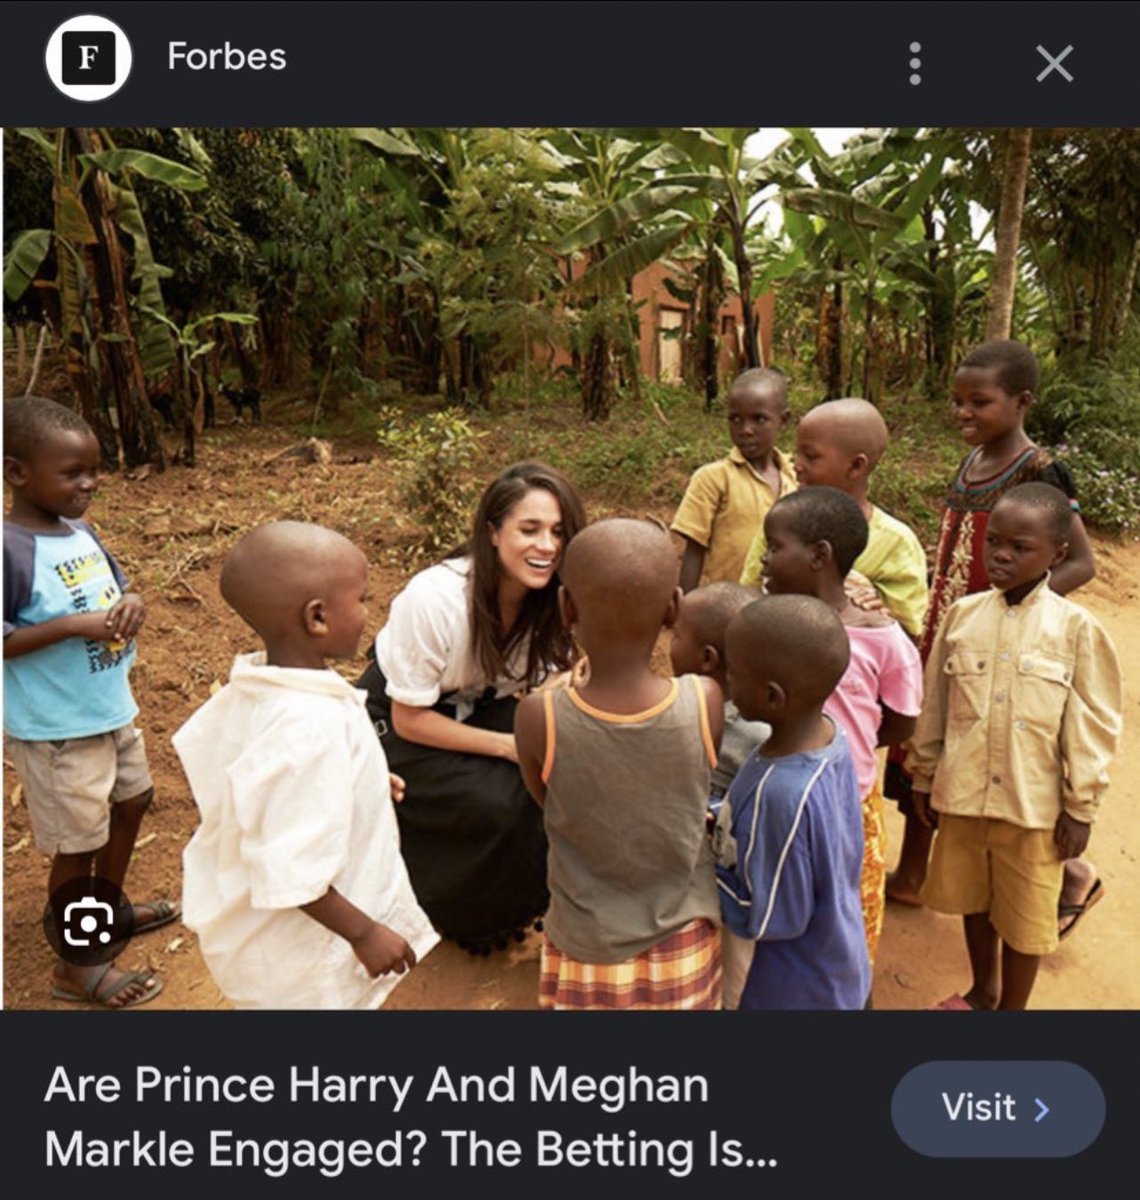 @NielsenChrissi How can you not love #HarryAndMeghan 🥰🥰, both as the #WorkingRoyals & presently as the #RoyalsWithoutBorders. 🙌
The #LeftOverRoyals are the epitome of #WhiteSaviorComplex, the #RacistRoyalFamily, still learning how to 
embrace the POC. 🤢🤮
#AbolishTheMonarchy . #AryanPrincess…